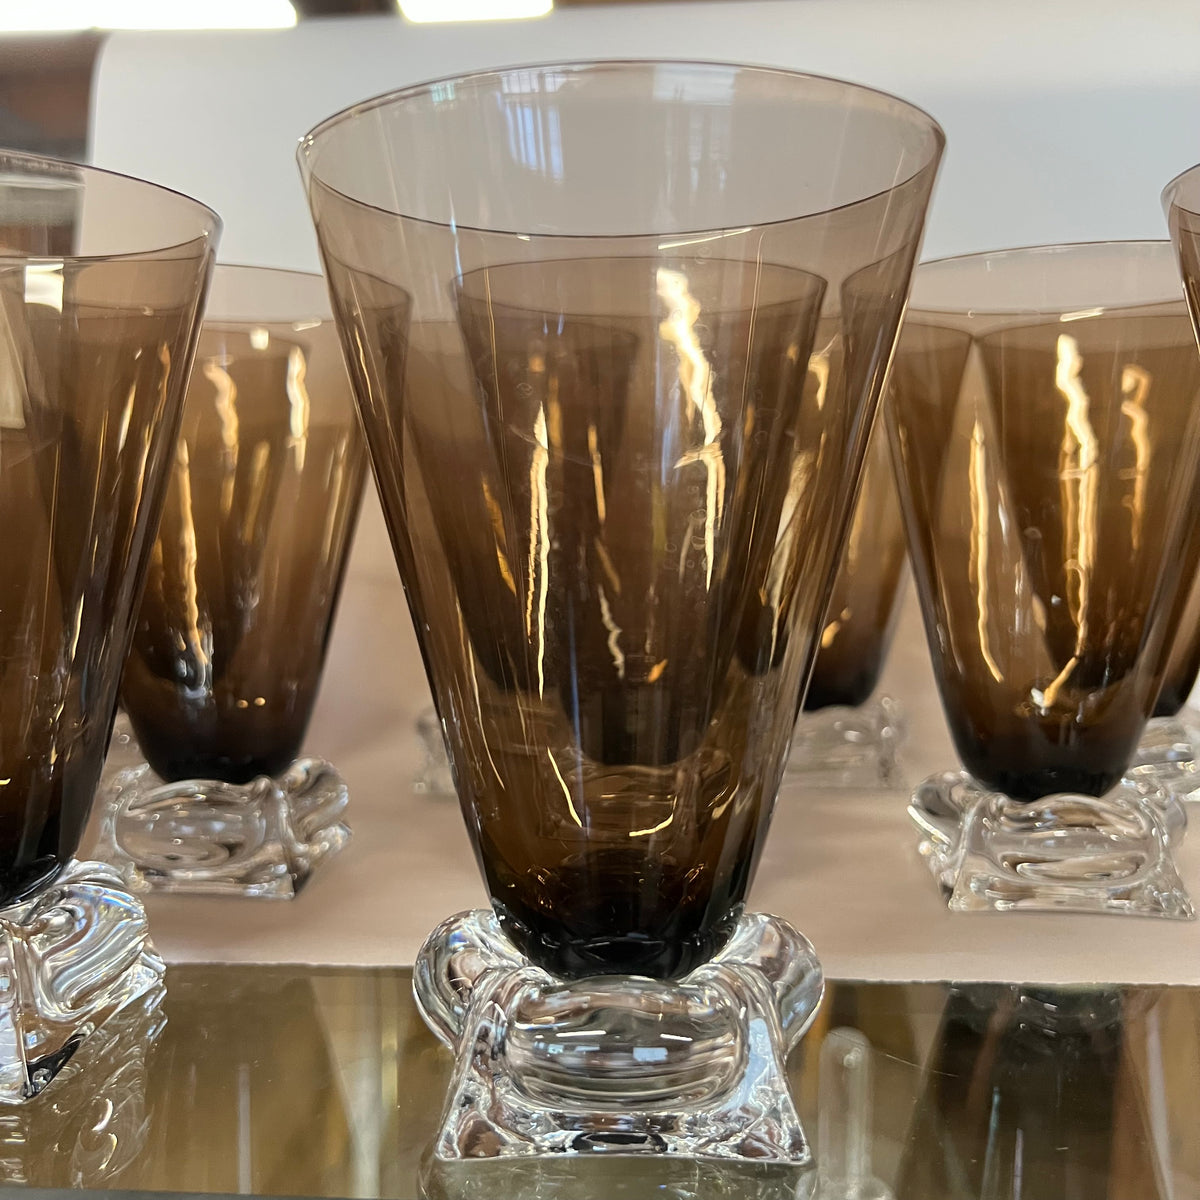 Bryce Bros Tempo Glassware in Morocco (a brownish glass) - Set of 10